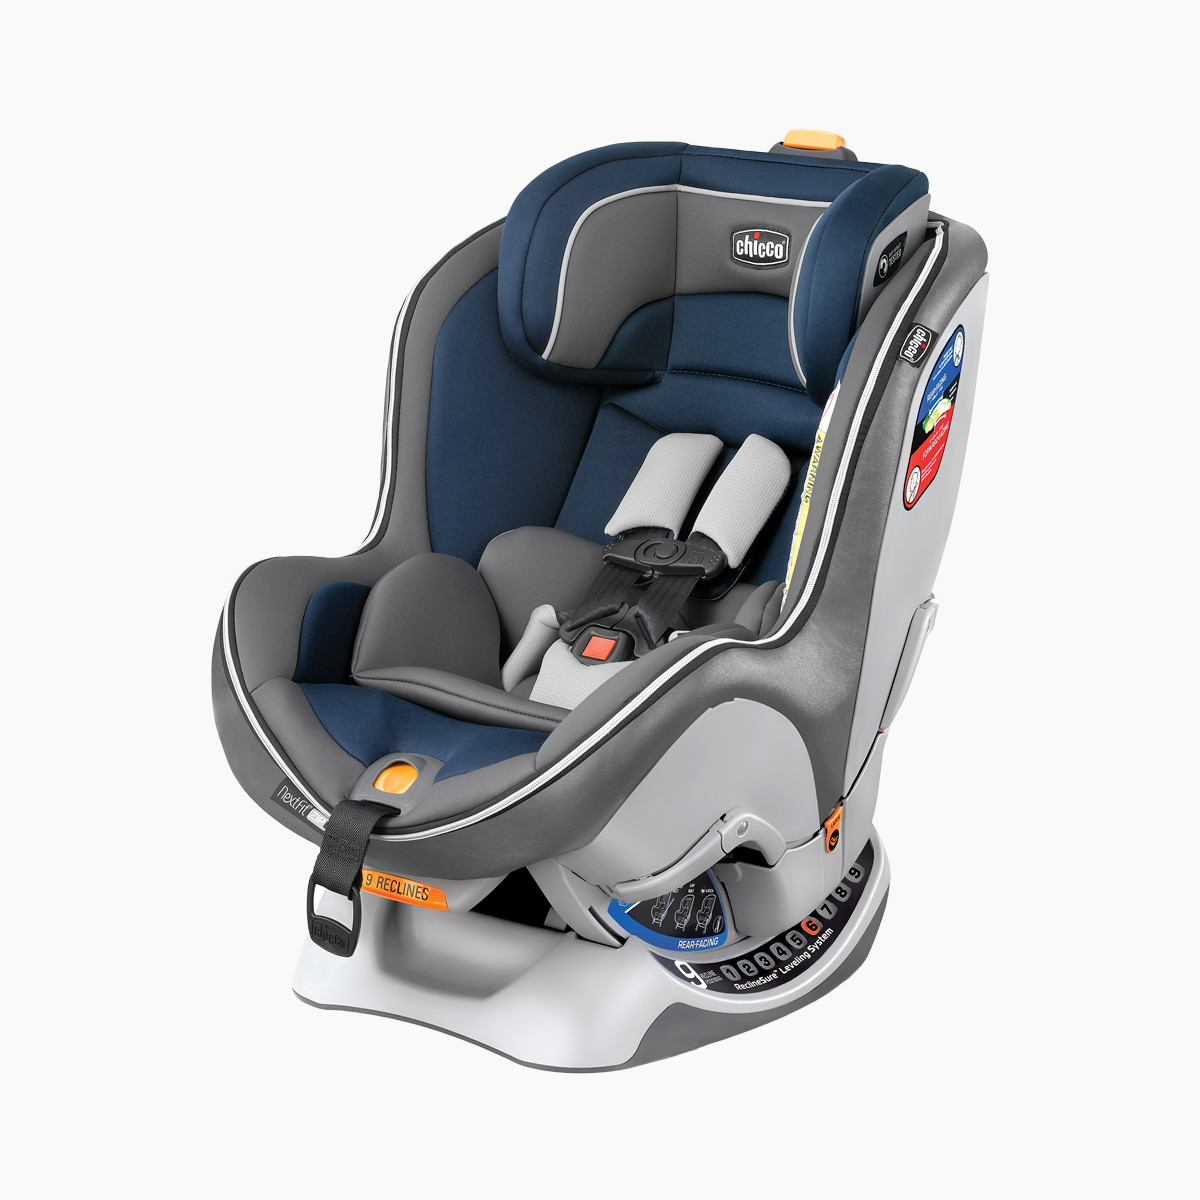 Chicco NextFit Zip Convertible Car Seat - Sapphire (Old).